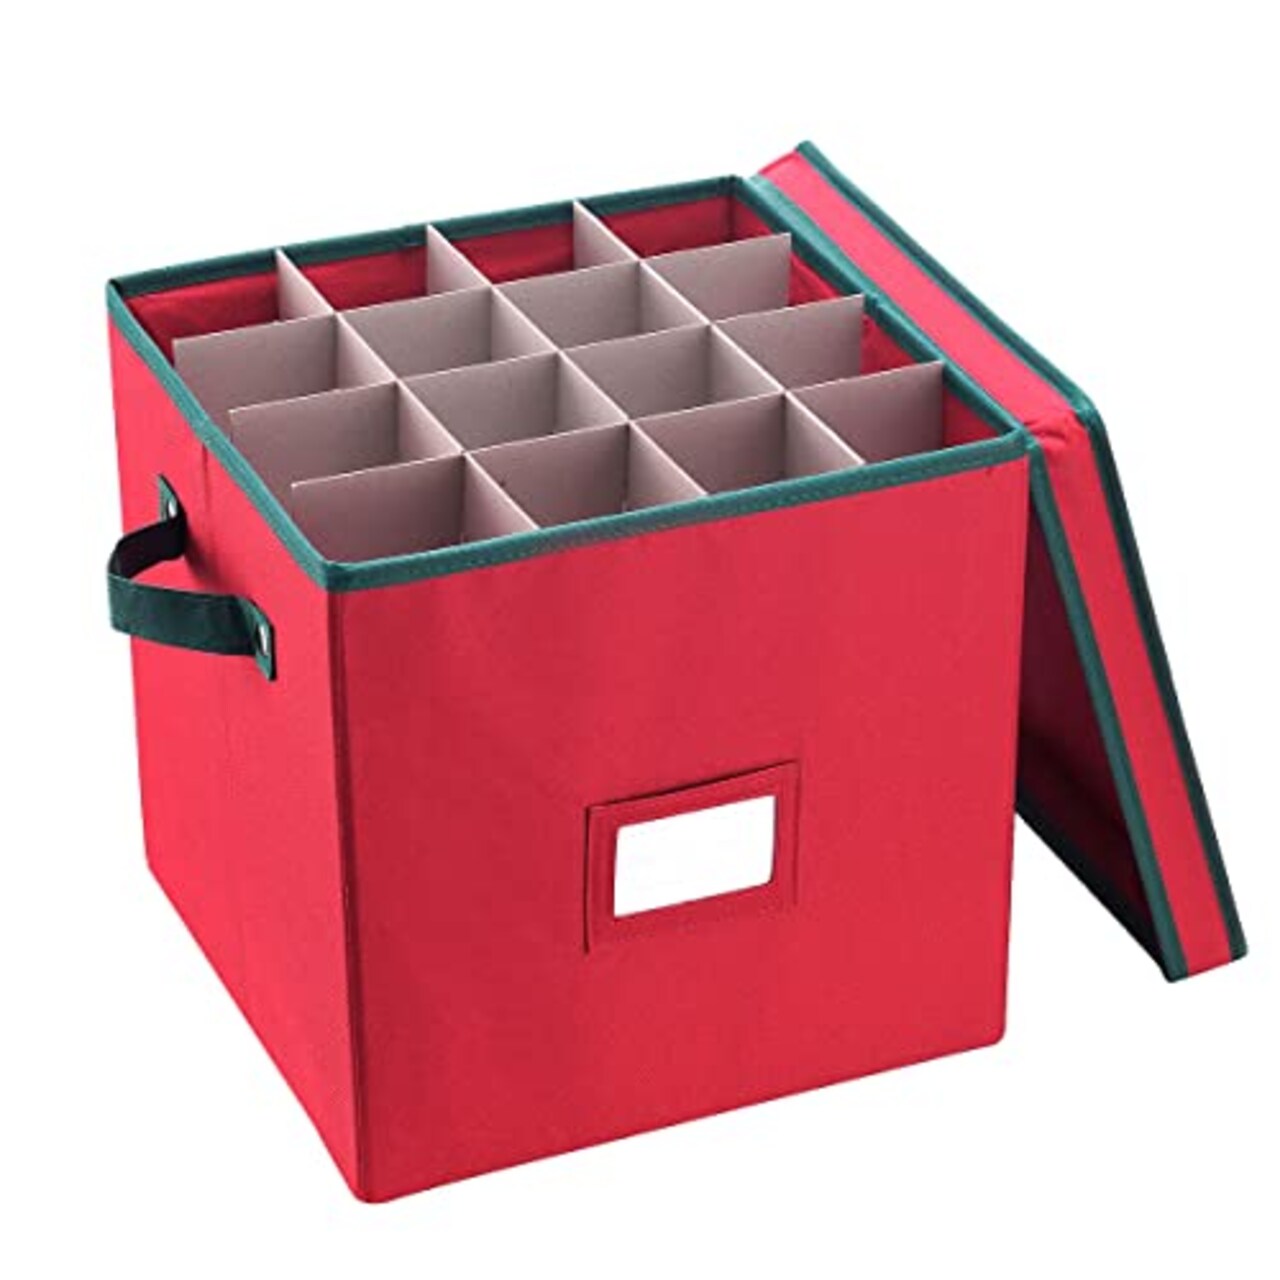 Elf Stor Christmas Box with Adjustable Dividers and Lid Ornaments Storage,  Red